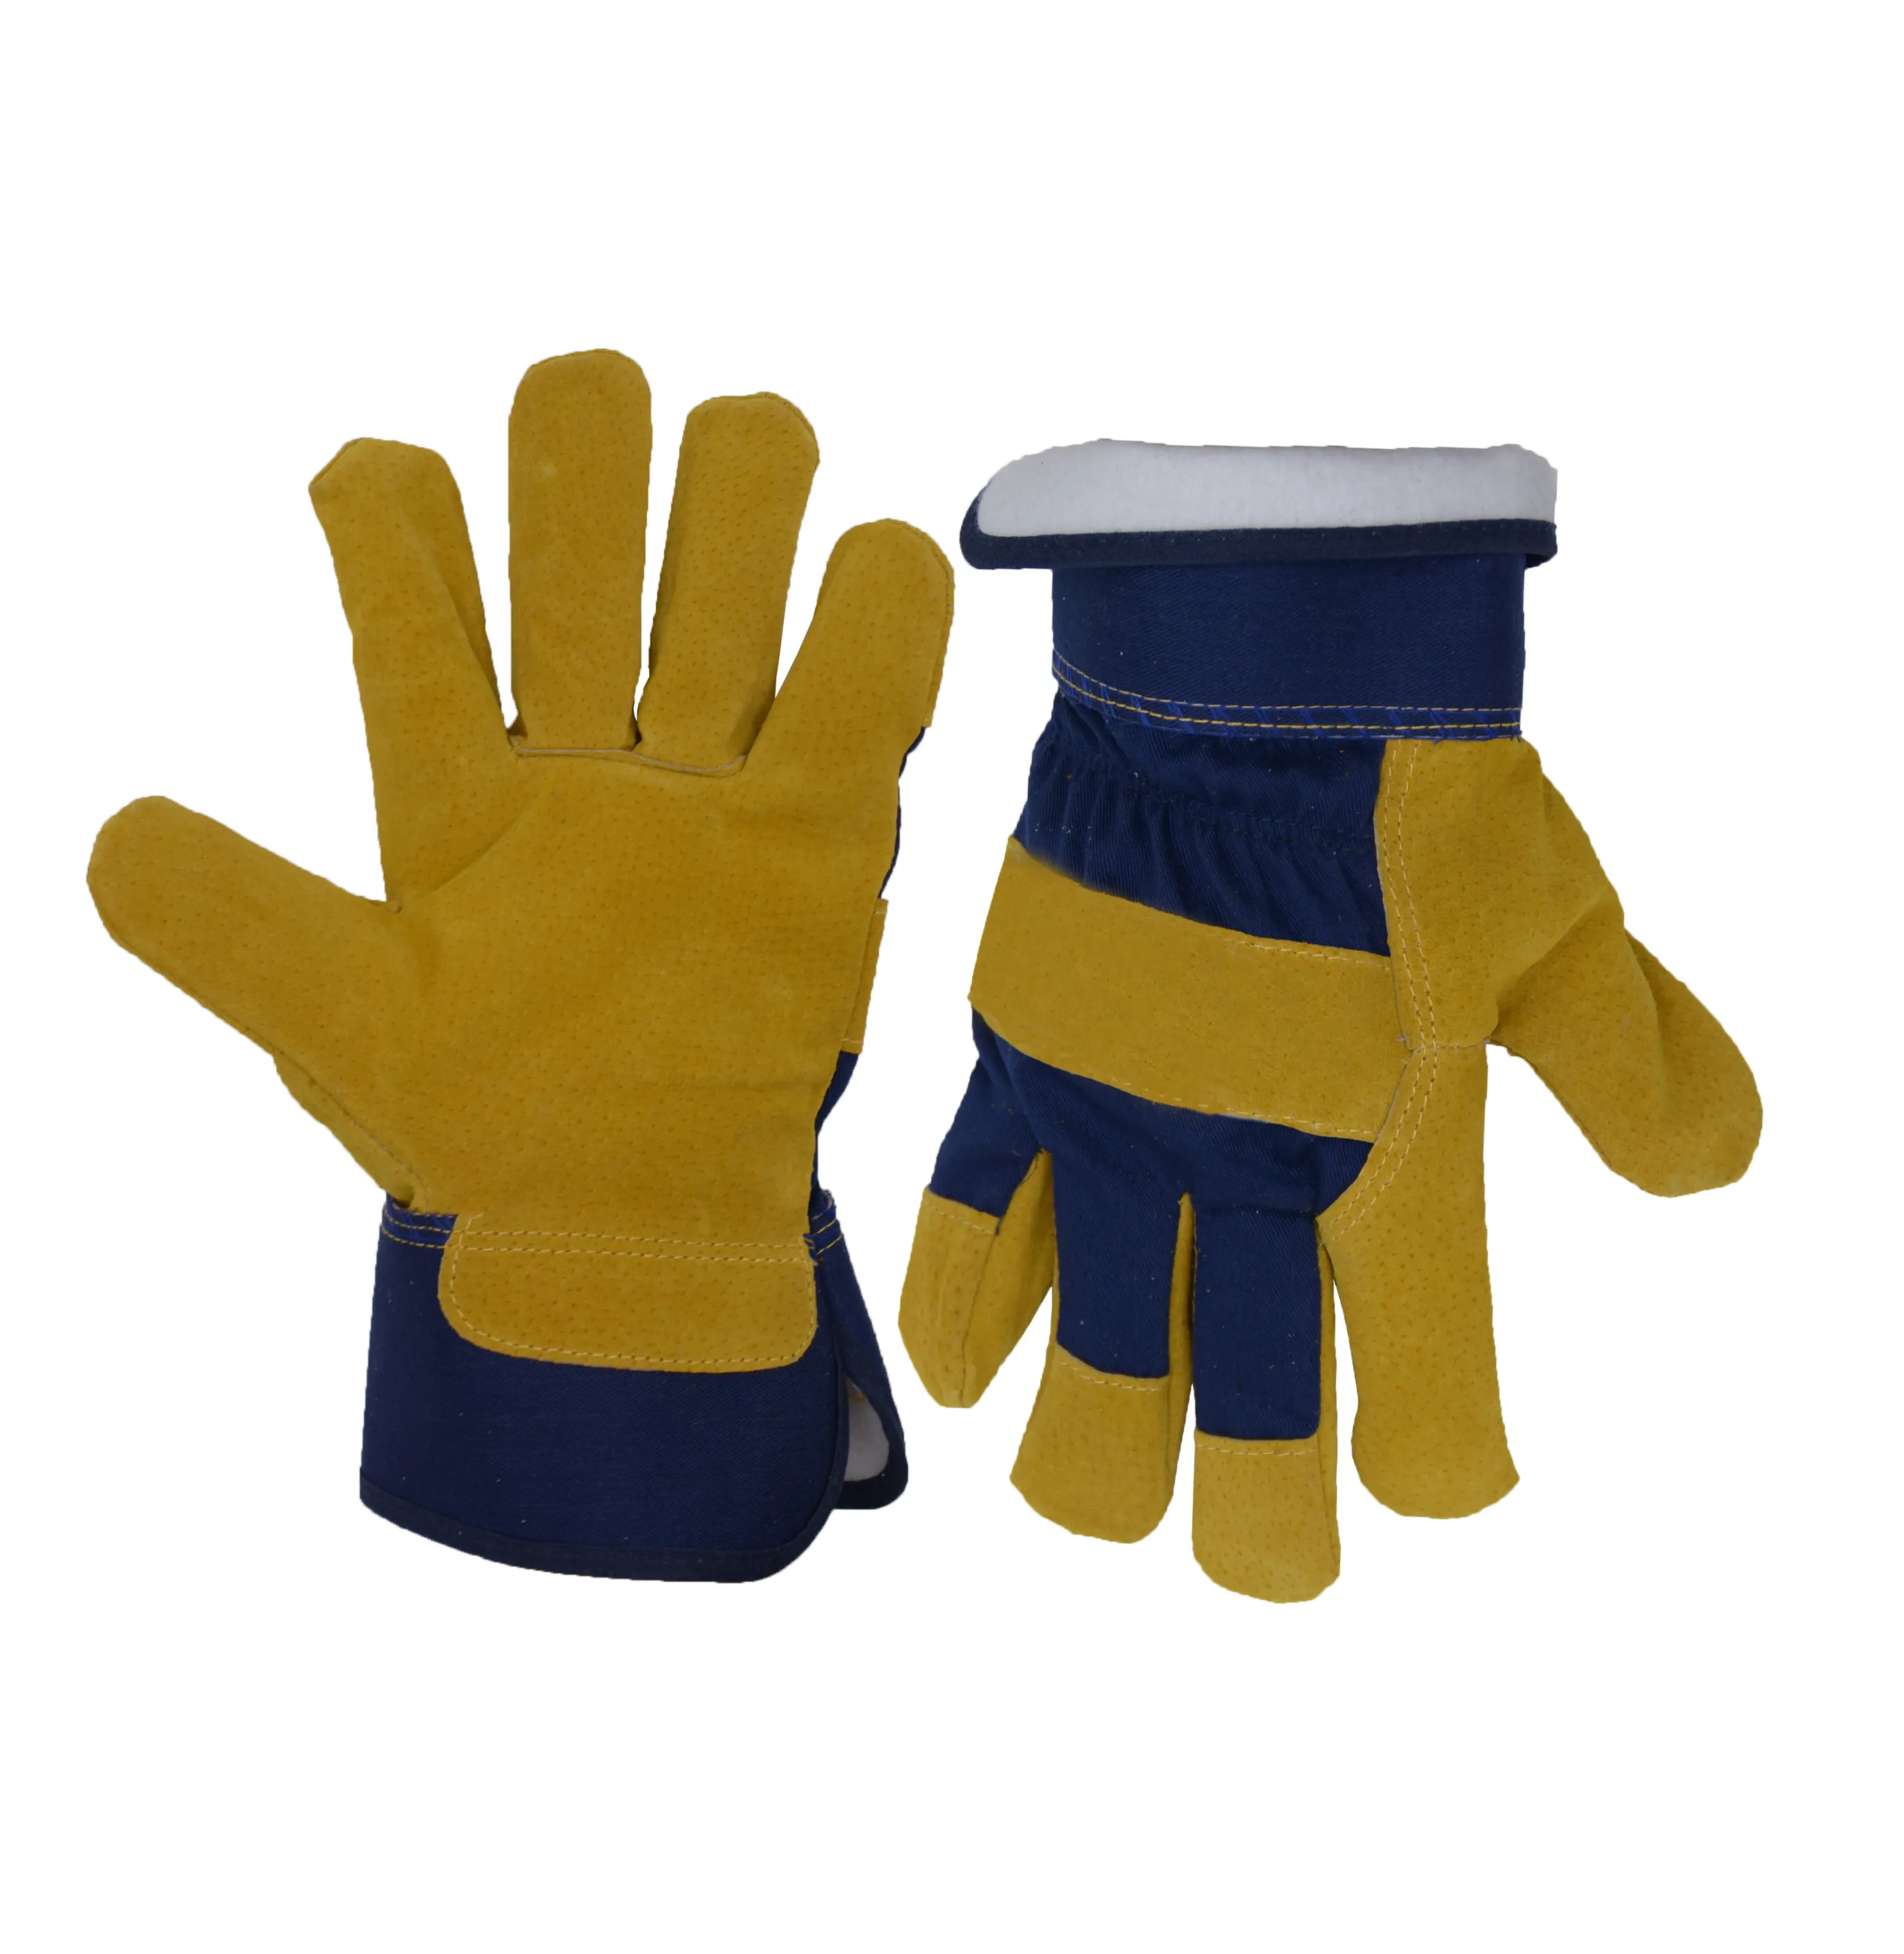 Durable Competitive Price Professional Welding Work Gloves Cowhide Leather Top Quality Safety Work Wear Gloves